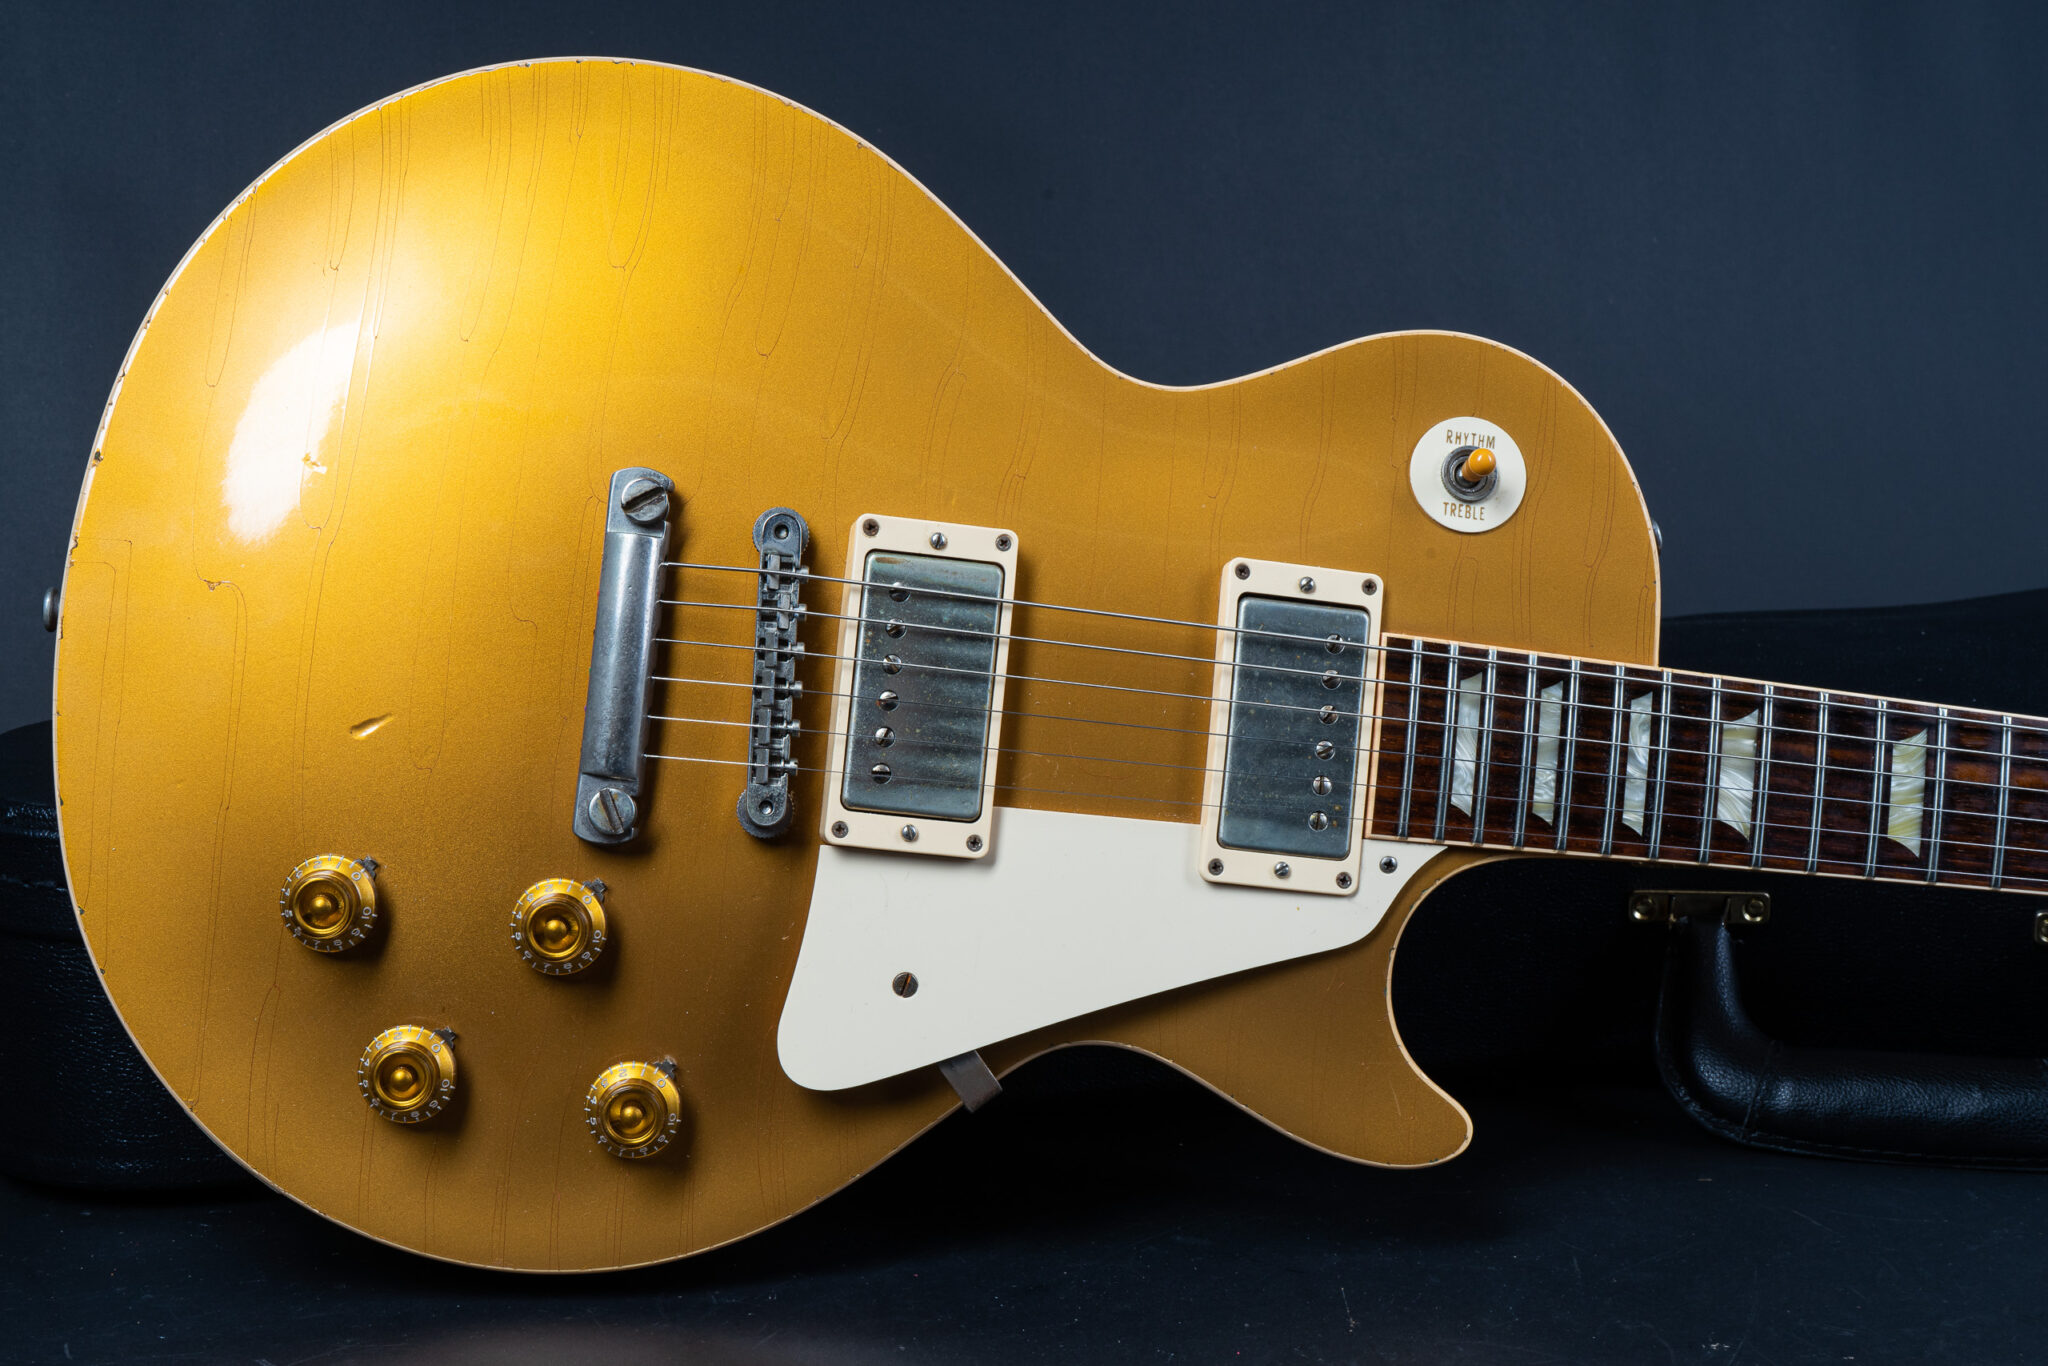 https://guitarpoint.de/app/uploads/products/2011-gibson-les-paul-1957-reissue-goldtop-lightly-aged/2011-Gibson-LP-1957-Goldtop-Aged-71881-9-2048x1366.jpg